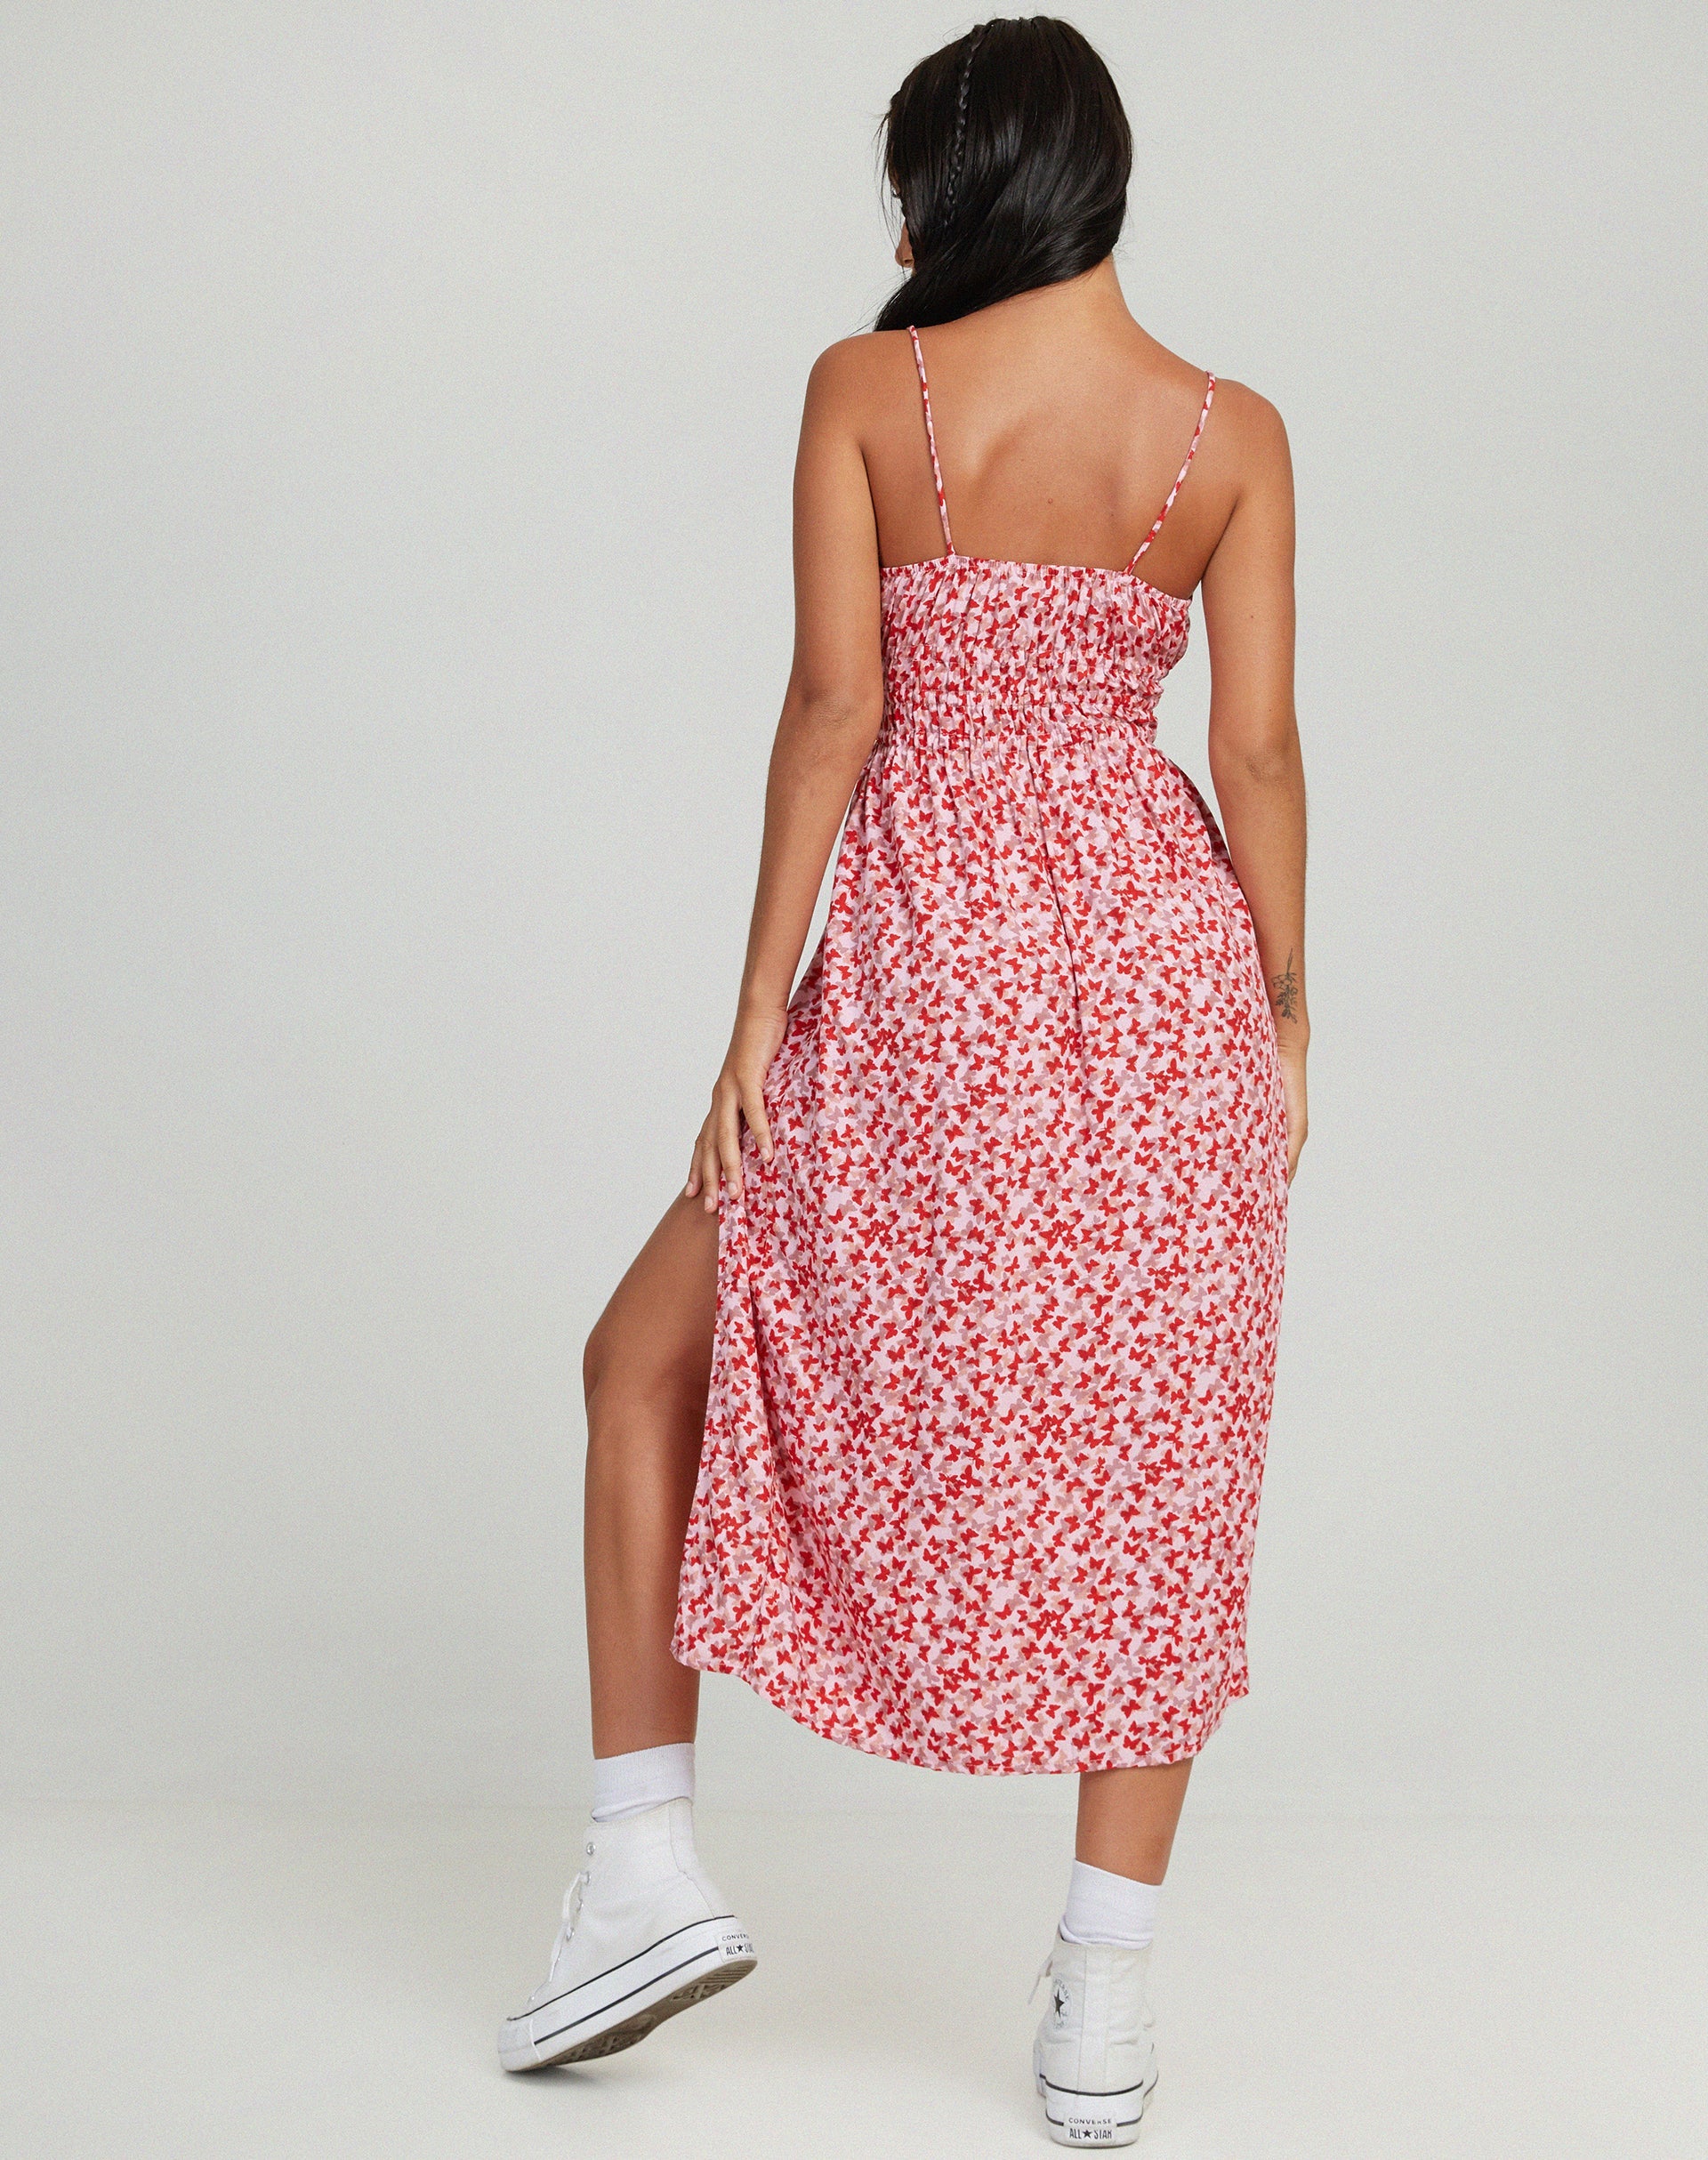 Jeyro Midi Dress in Ditsy Butterfly Peach and Red